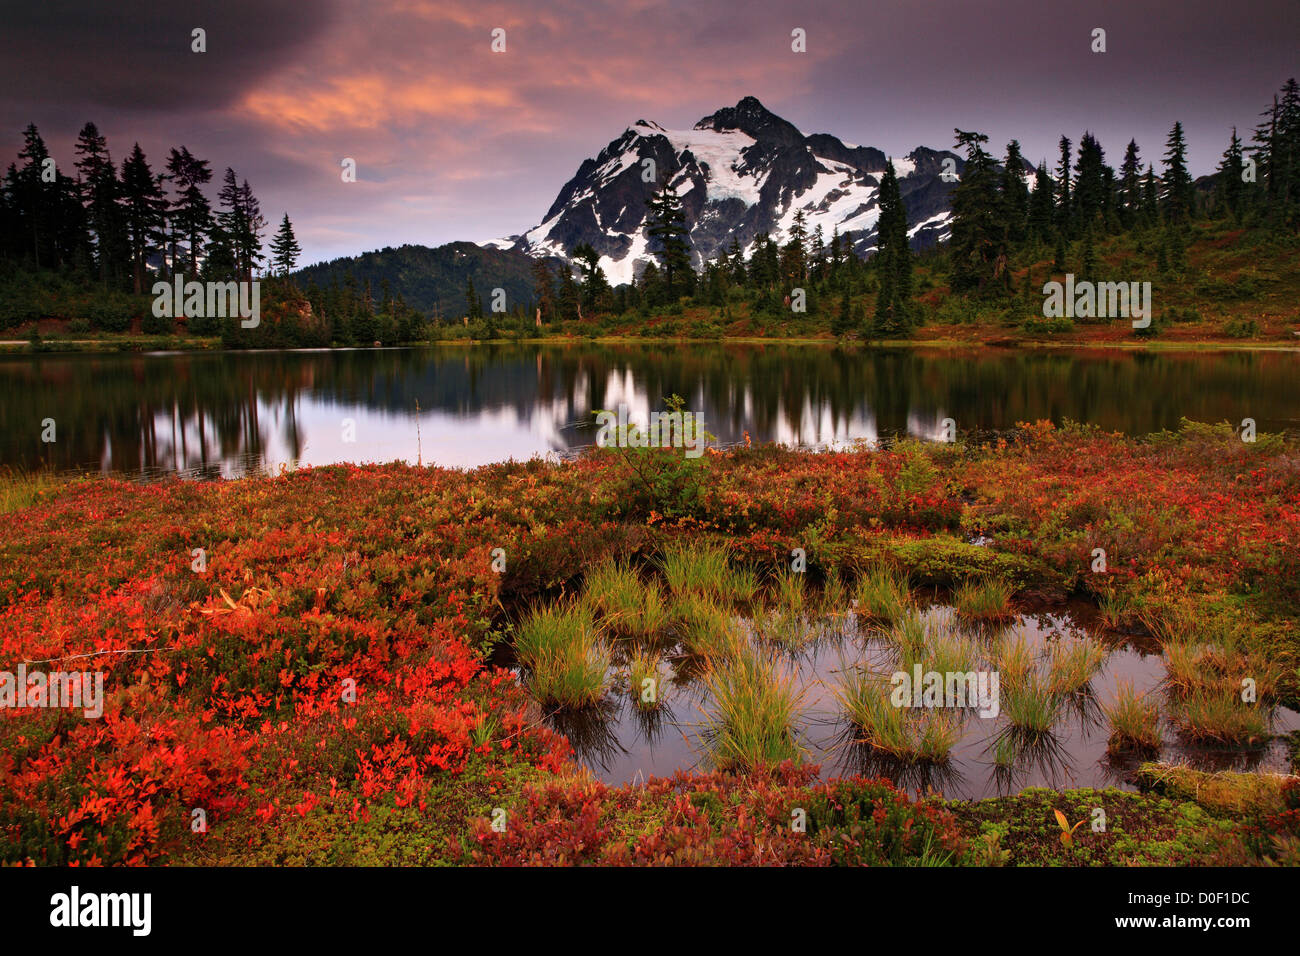 Mount Shuksan at sunset, seem from Picture Lake, Heather Meadows, Mount Baker National Recreation Area. Stock Photo